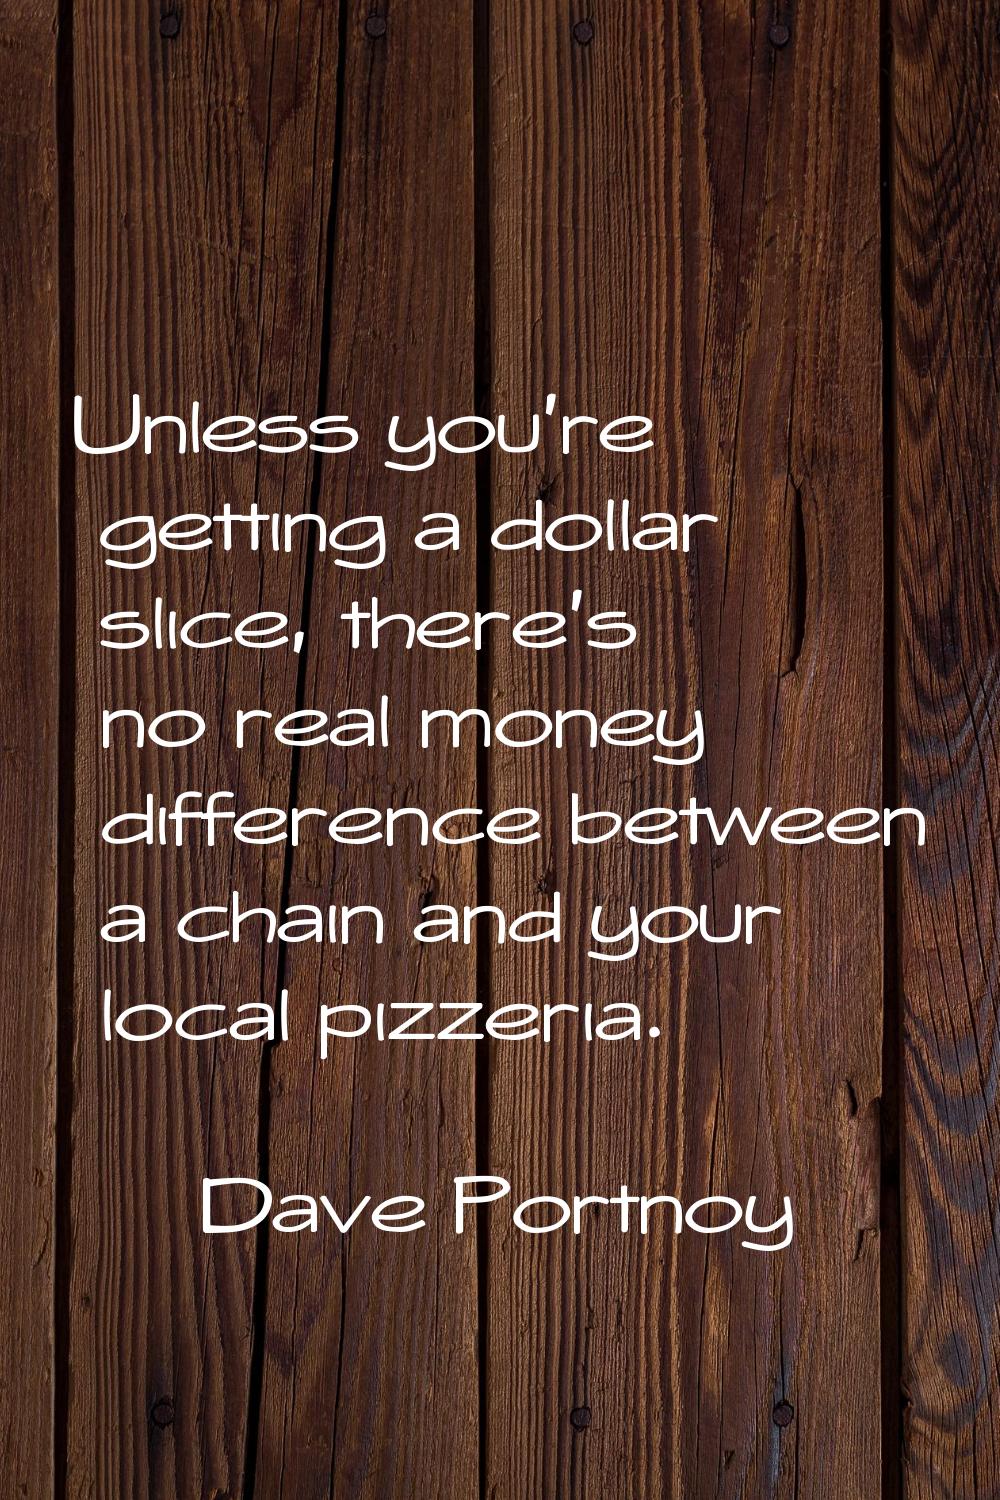 Unless you're getting a dollar slice, there's no real money difference between a chain and your loc